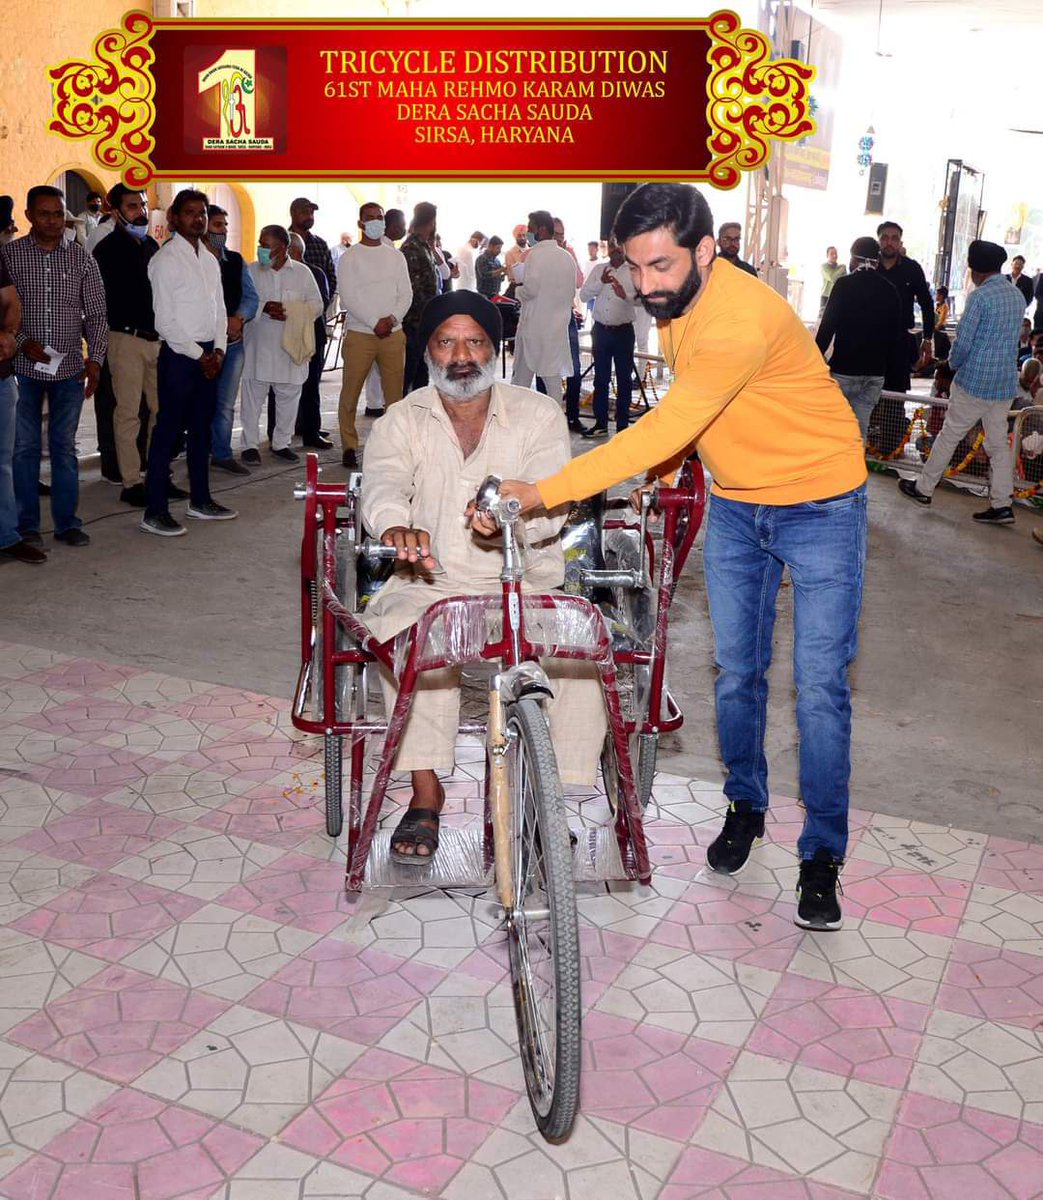 True Sentinels of humanity #DeraSachaSauda The Serviceman of who provided wheelchairs and calipers to the differently able and handicapped people and this inspiration came from Saint Dr. Gurmeet Ram Rahim Singh Ji Insan.#TrueCompanion
#CompanionIndeed
#CompanionForSpeciallyAbled